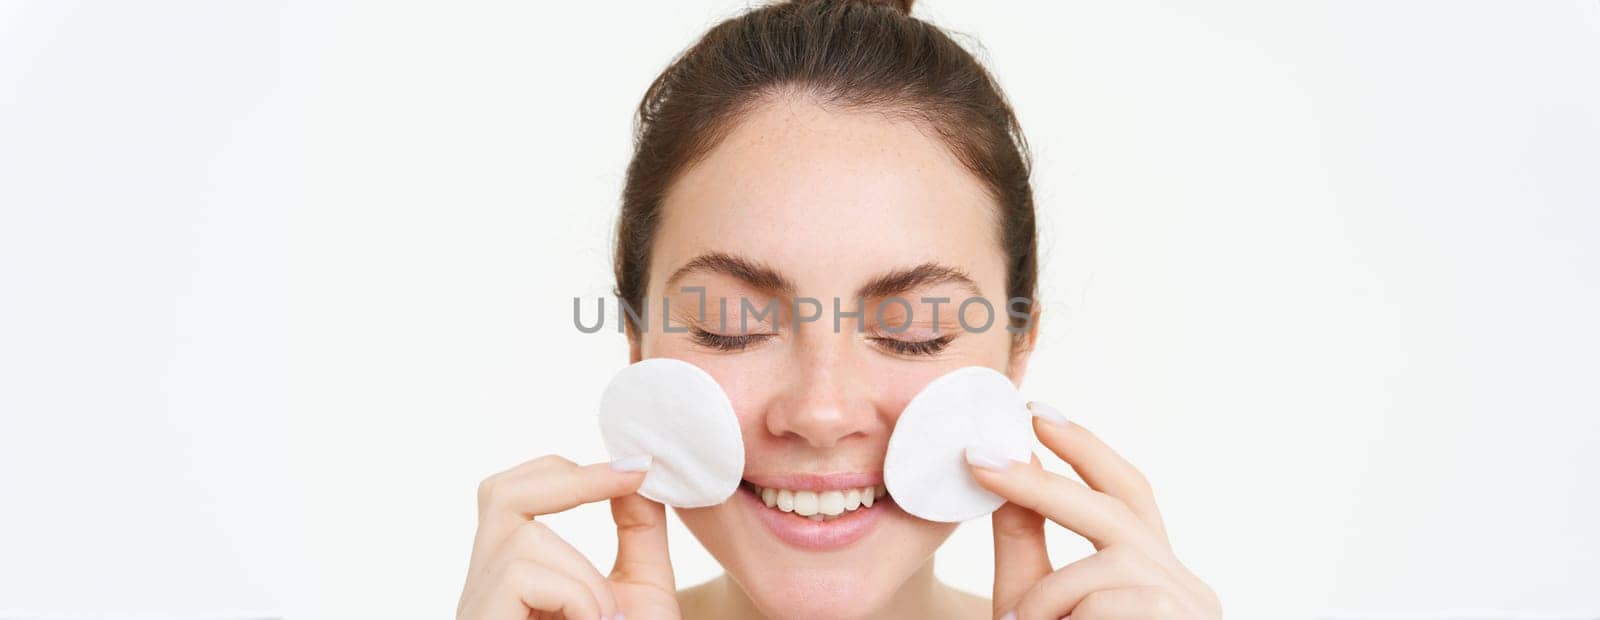 Image of young woman taking off her makeup with cotton pads, using facial cleanser, cleaning her face with skincare treatment, standing over white background.